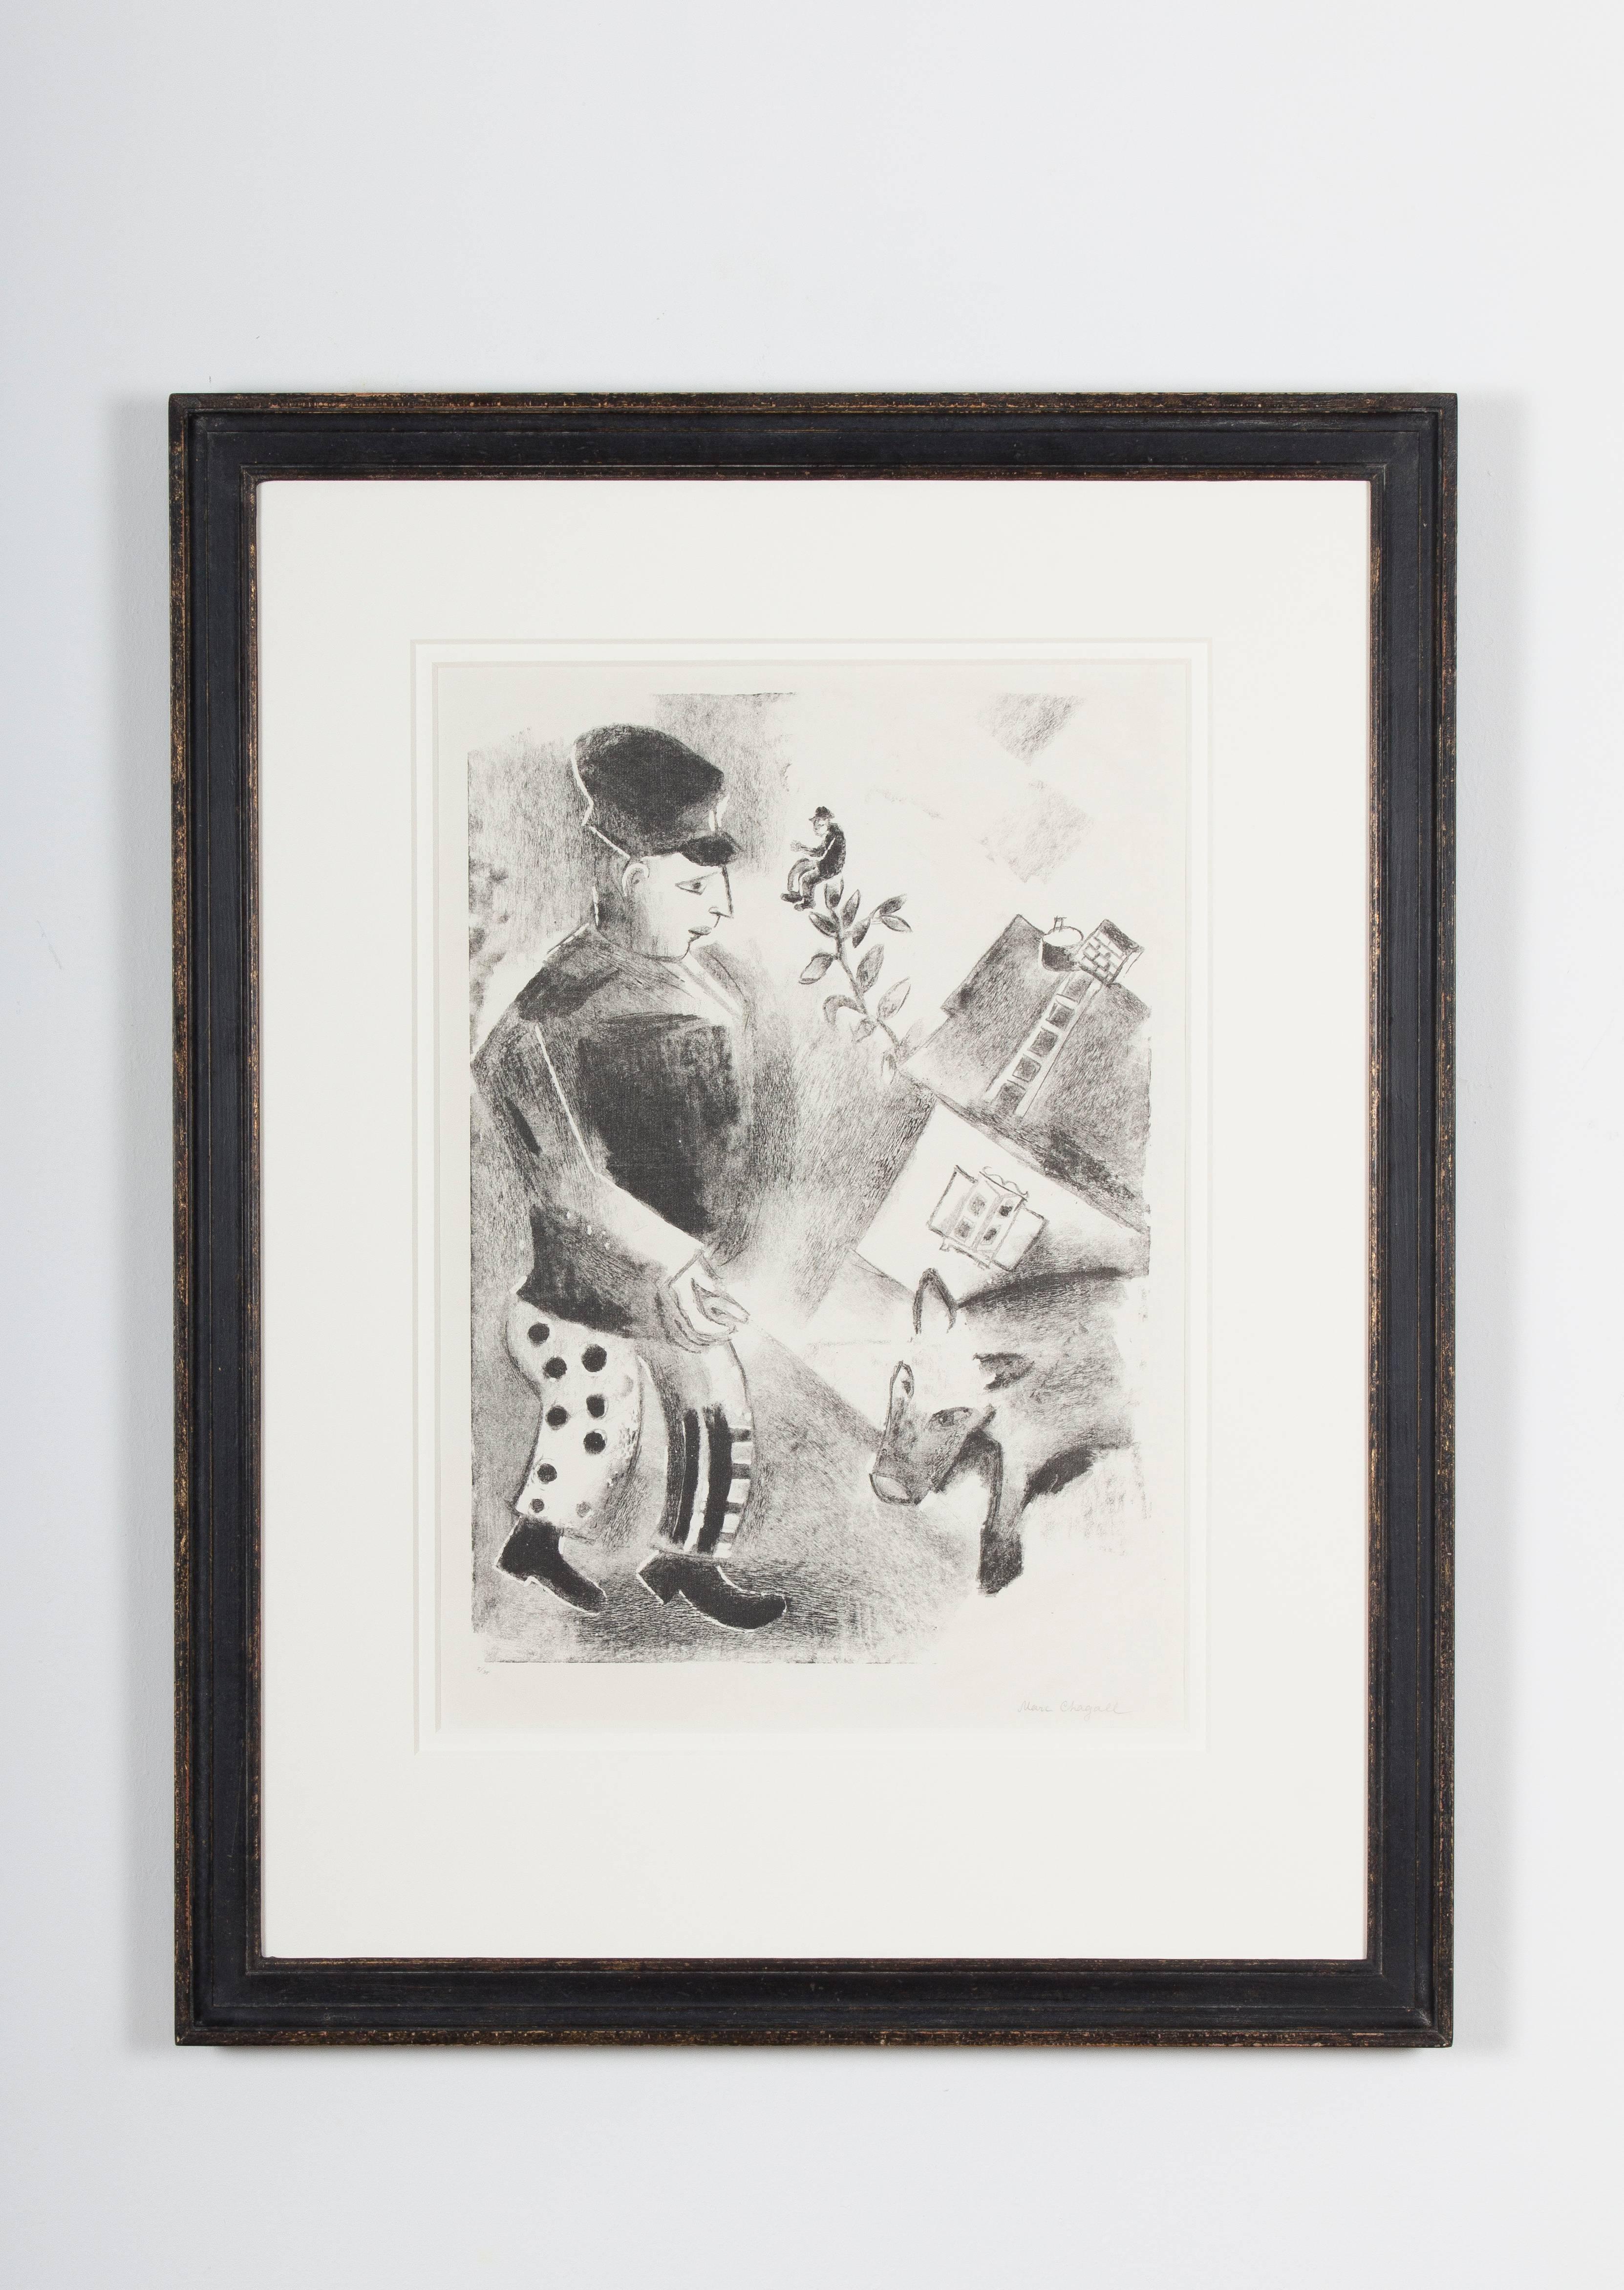 one of the earlier works from the Berlin period, titled with 'L'Homme au cochon'.
Numbered 5/35 and hand signed with pencil 'Marc Chagall'

Technique: lithograph on Vergé paper
Measures: Illustration 46.5 x 32.5 cm / 18.3 x 12.8''
Paper 68 x 51 cm /